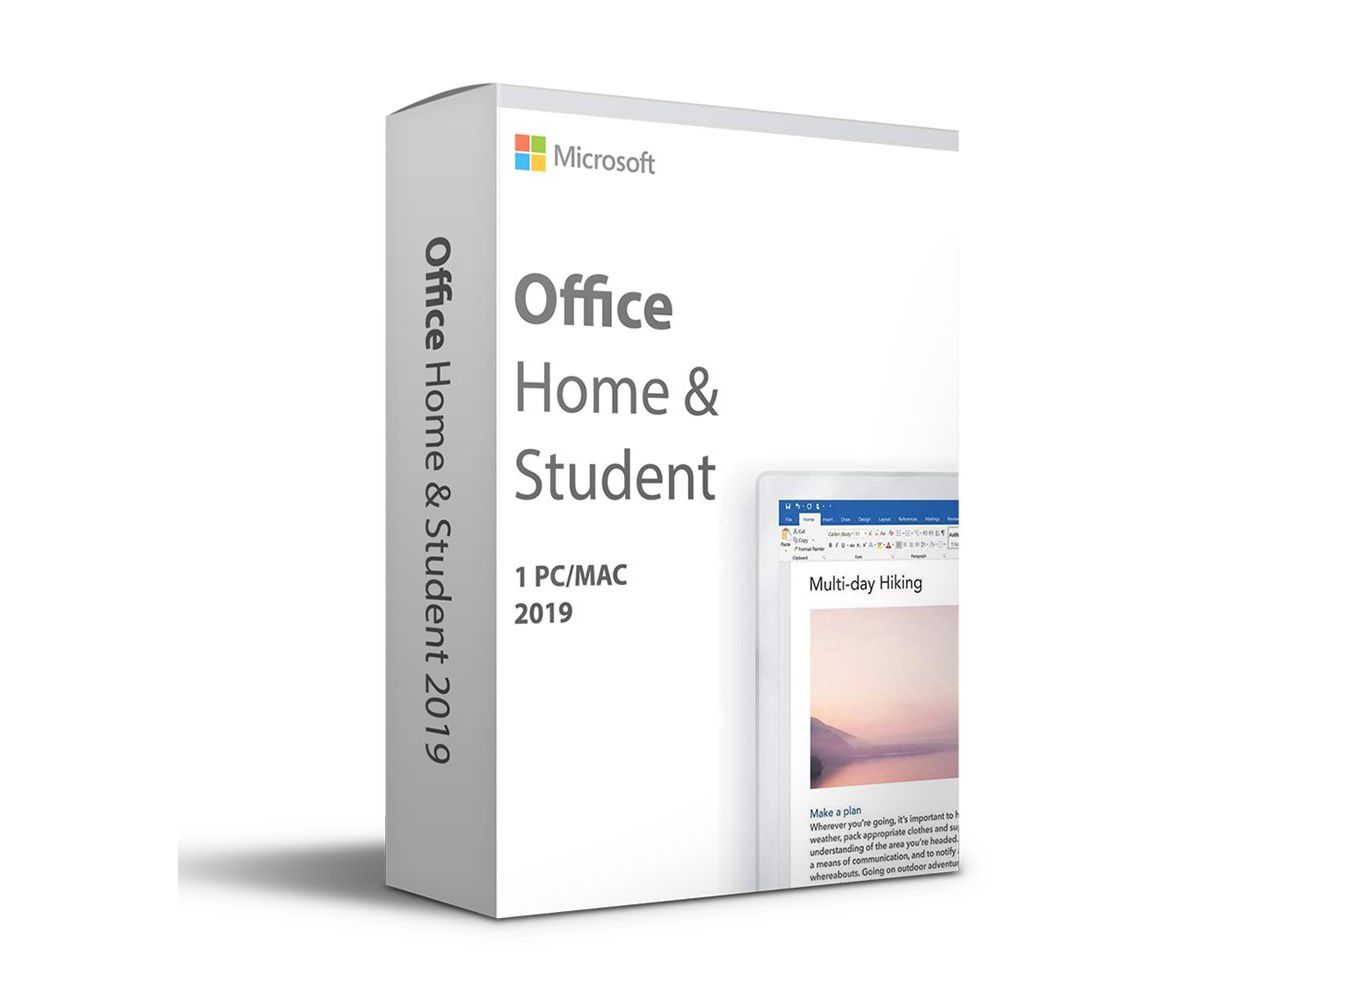 Microsoft Office 2019 Home and student. Microsoft Office для дома и учебы 2019. Home and student 2019. Microsoft Office 2019 Home and Business.